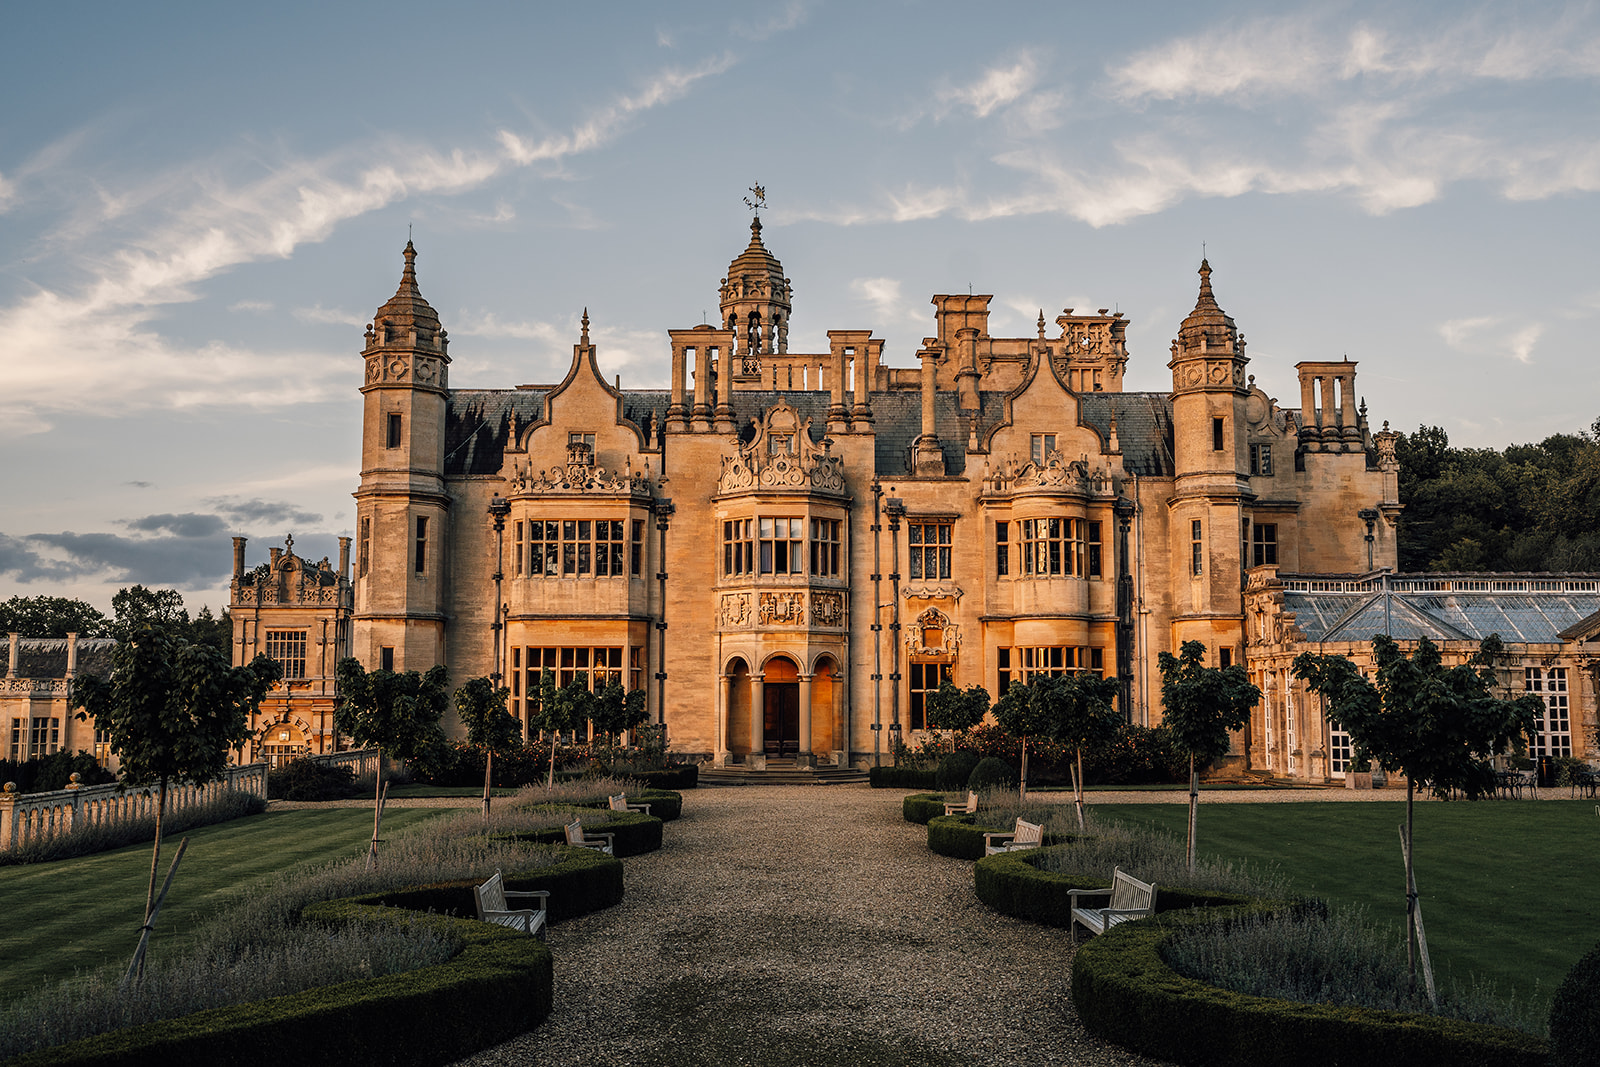 rear view of Harlaxton manor during sunset